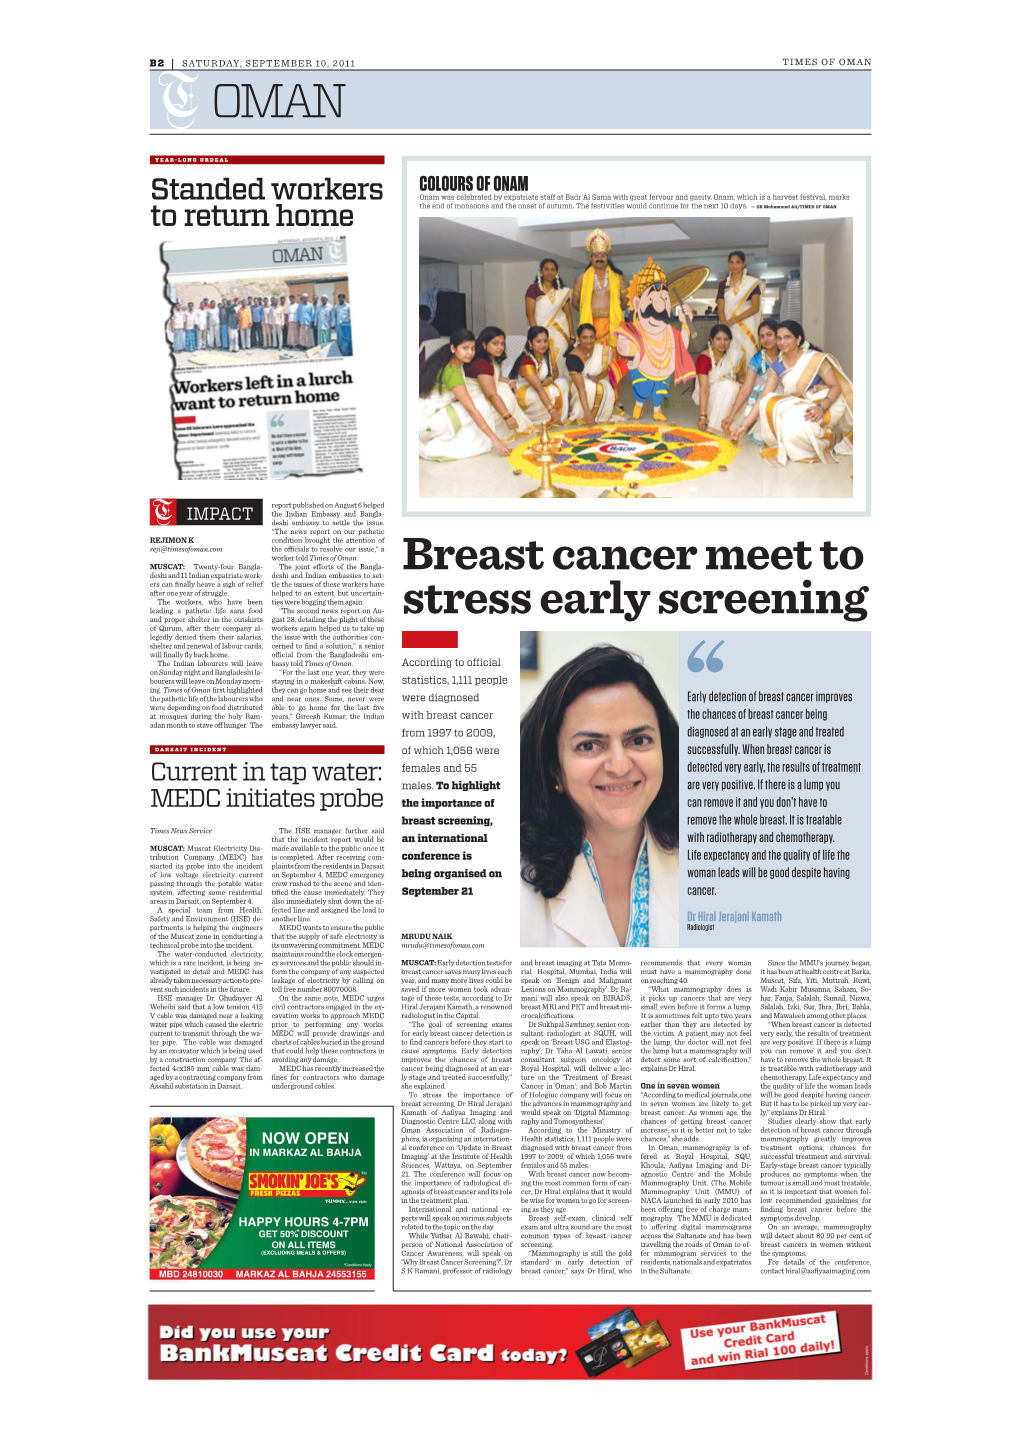 OMAN Breast Cancer Meet to Stress Early Screening